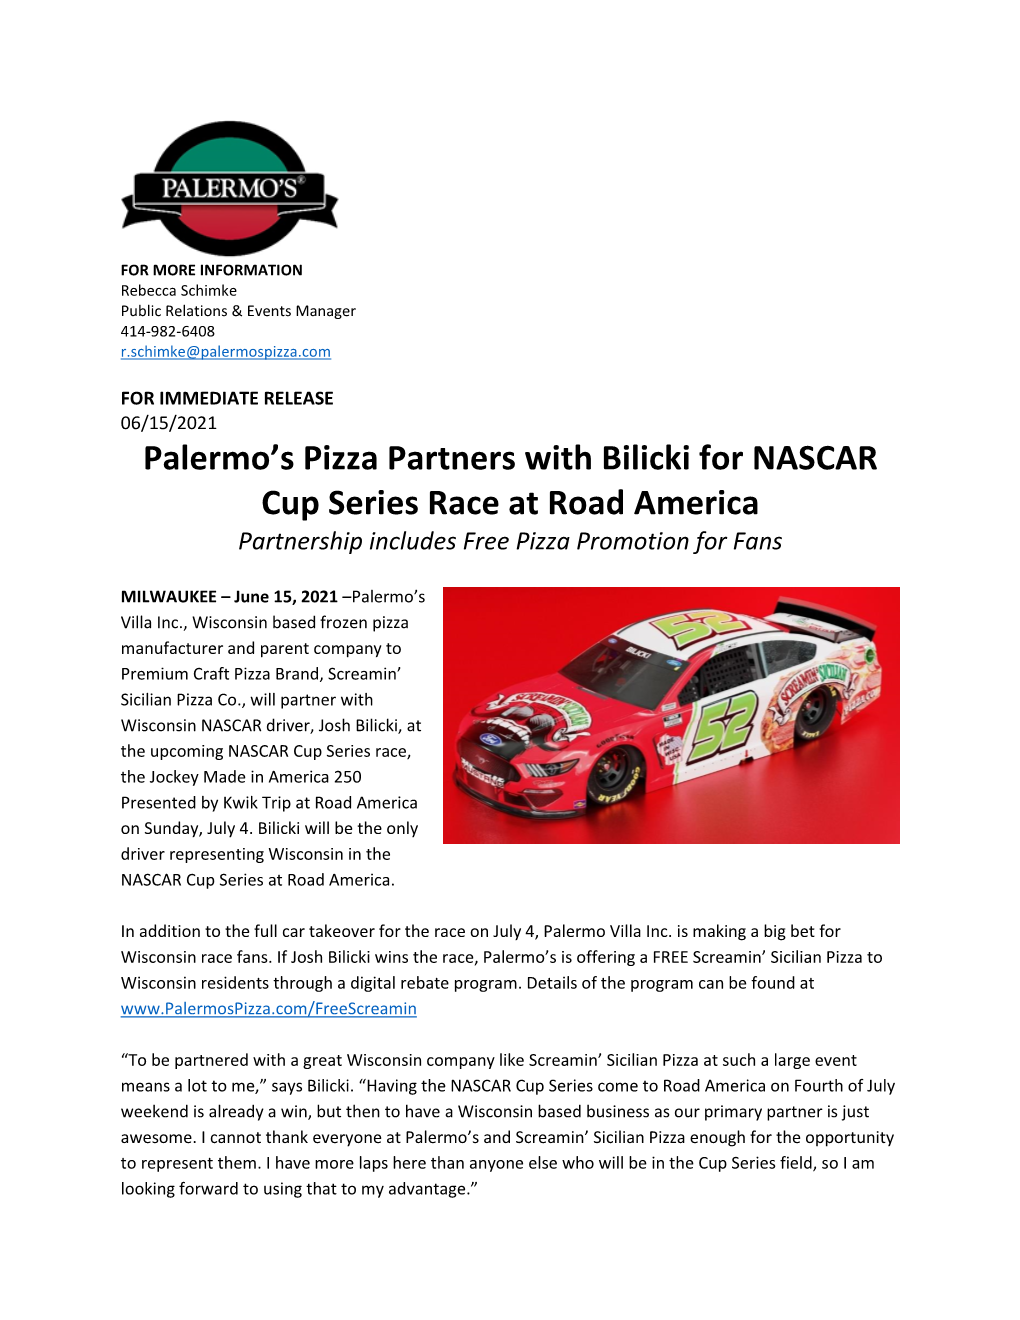 Palermo's Pizza Partners with Bilicki for NASCAR Cup Series Race At